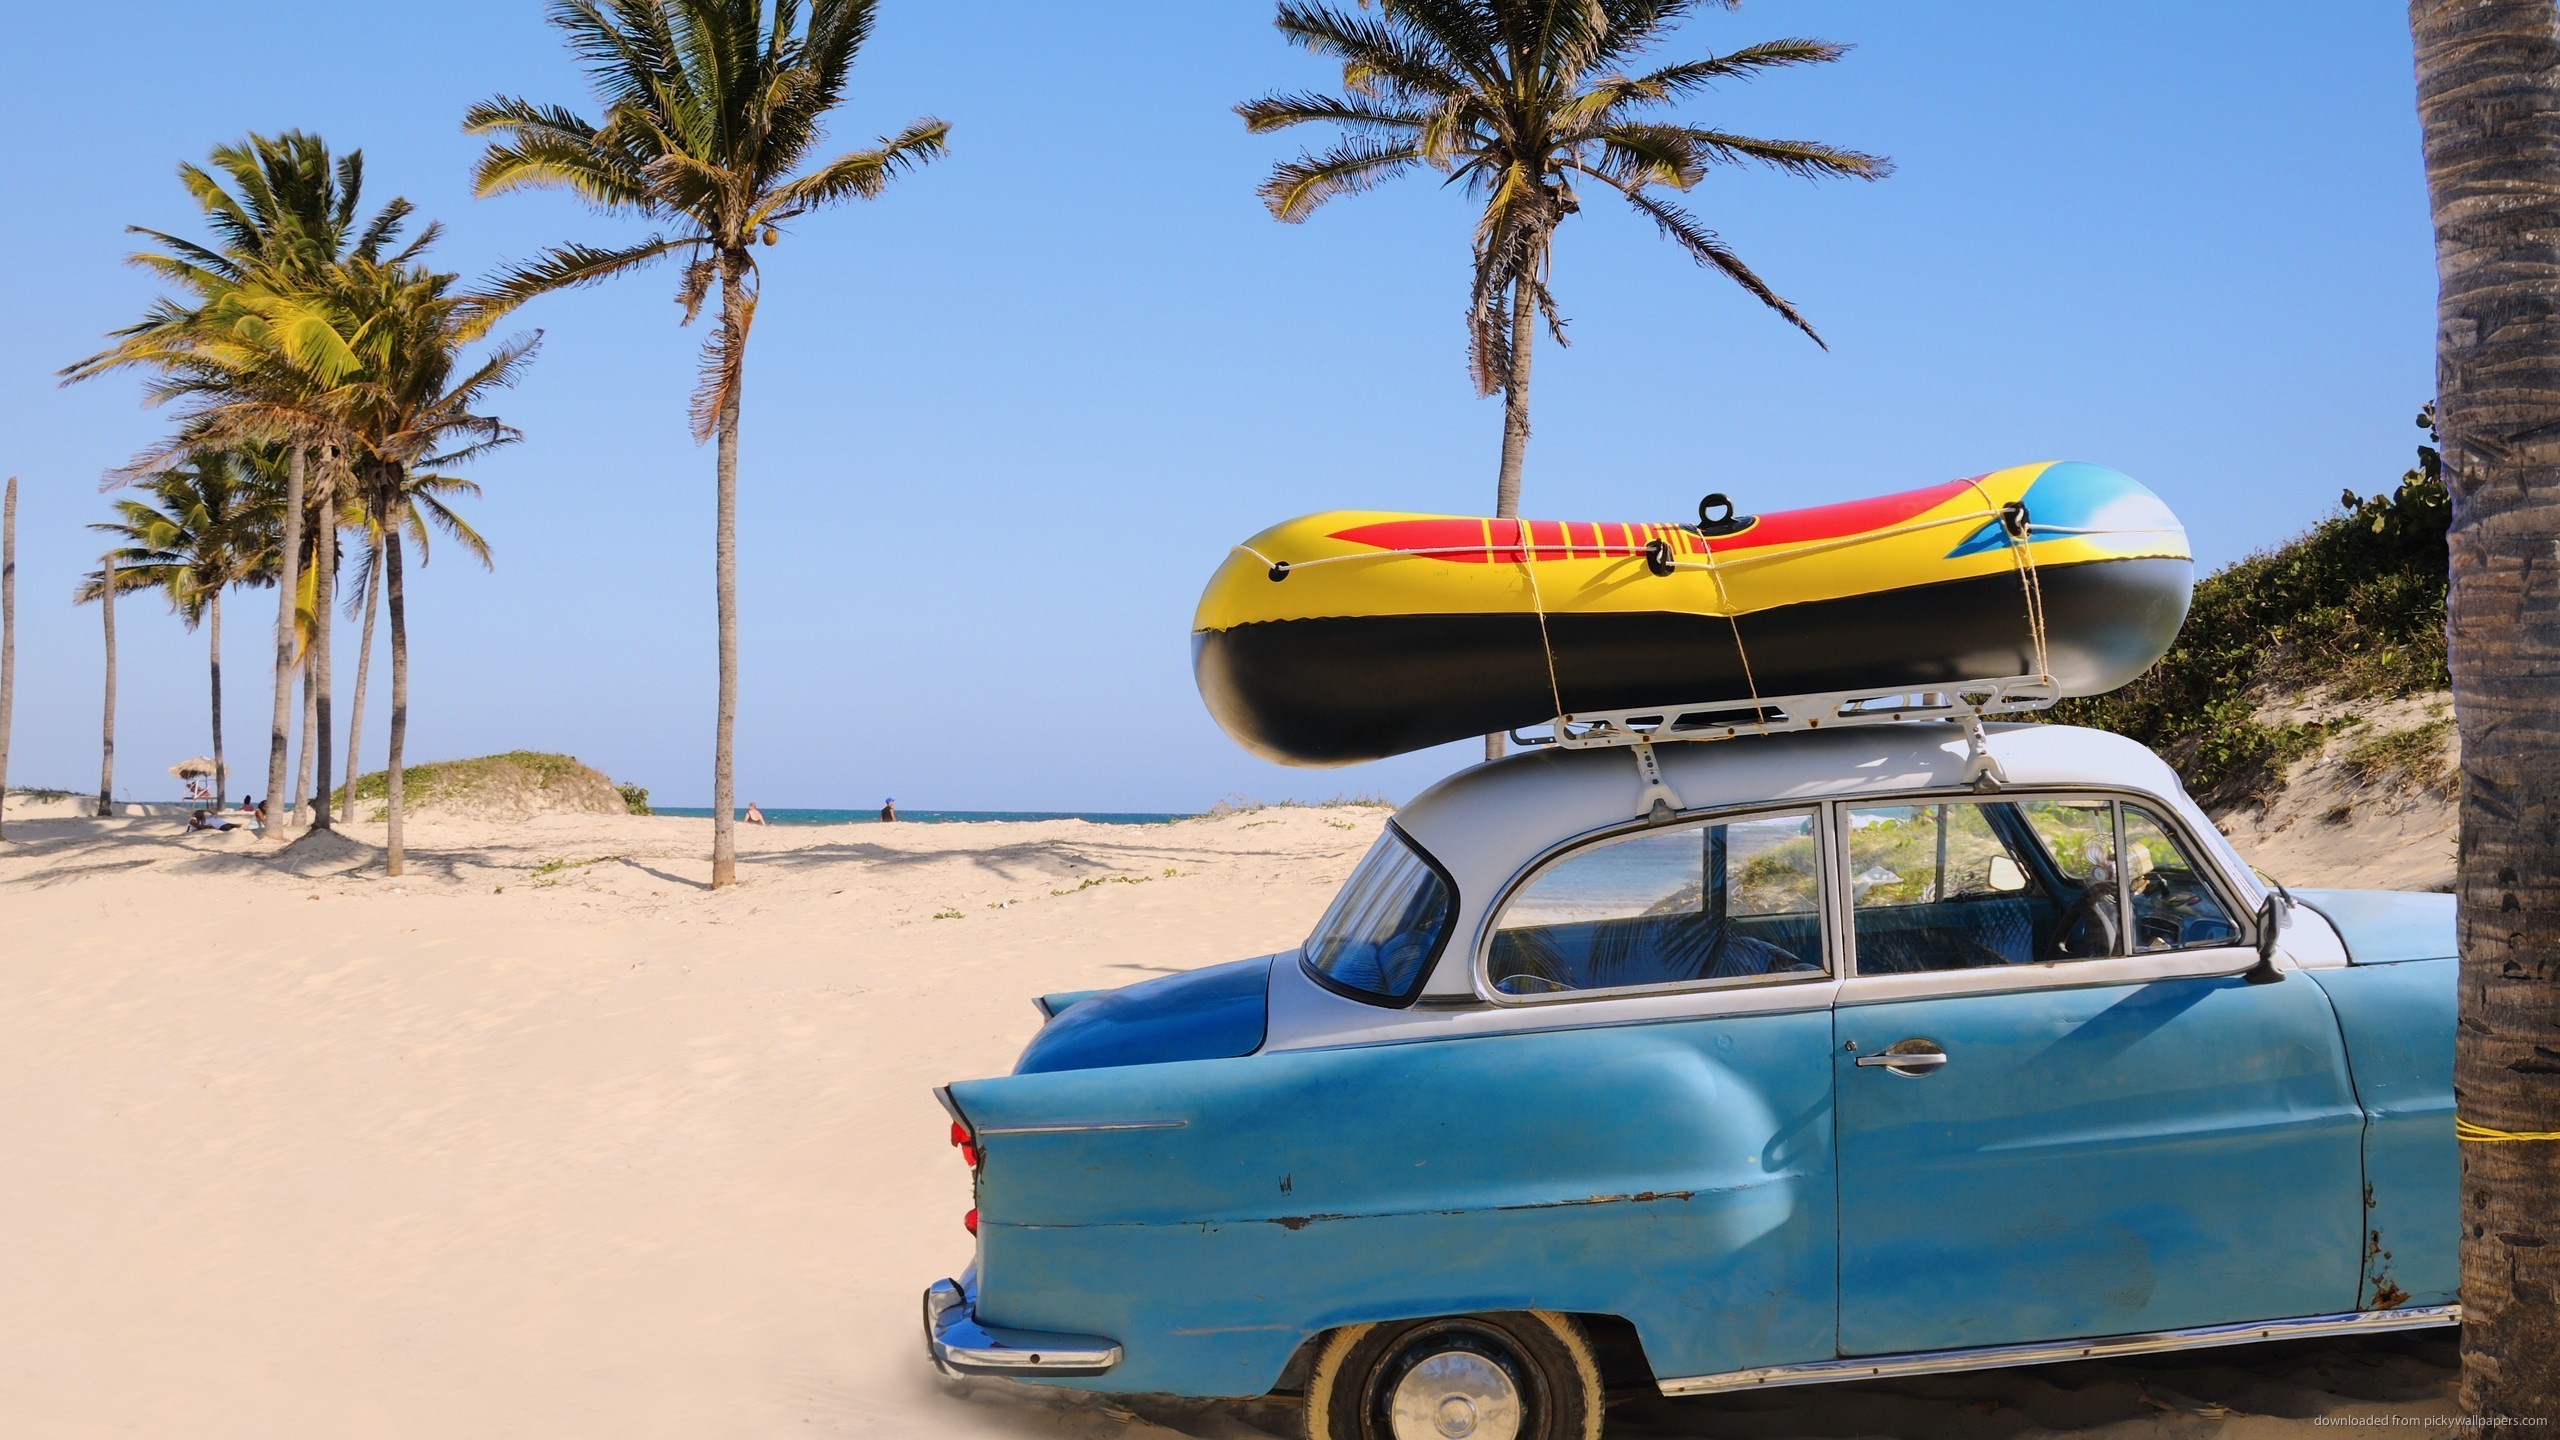 2560x1440 Old Car With The Boat On Hawaiian Beach for 